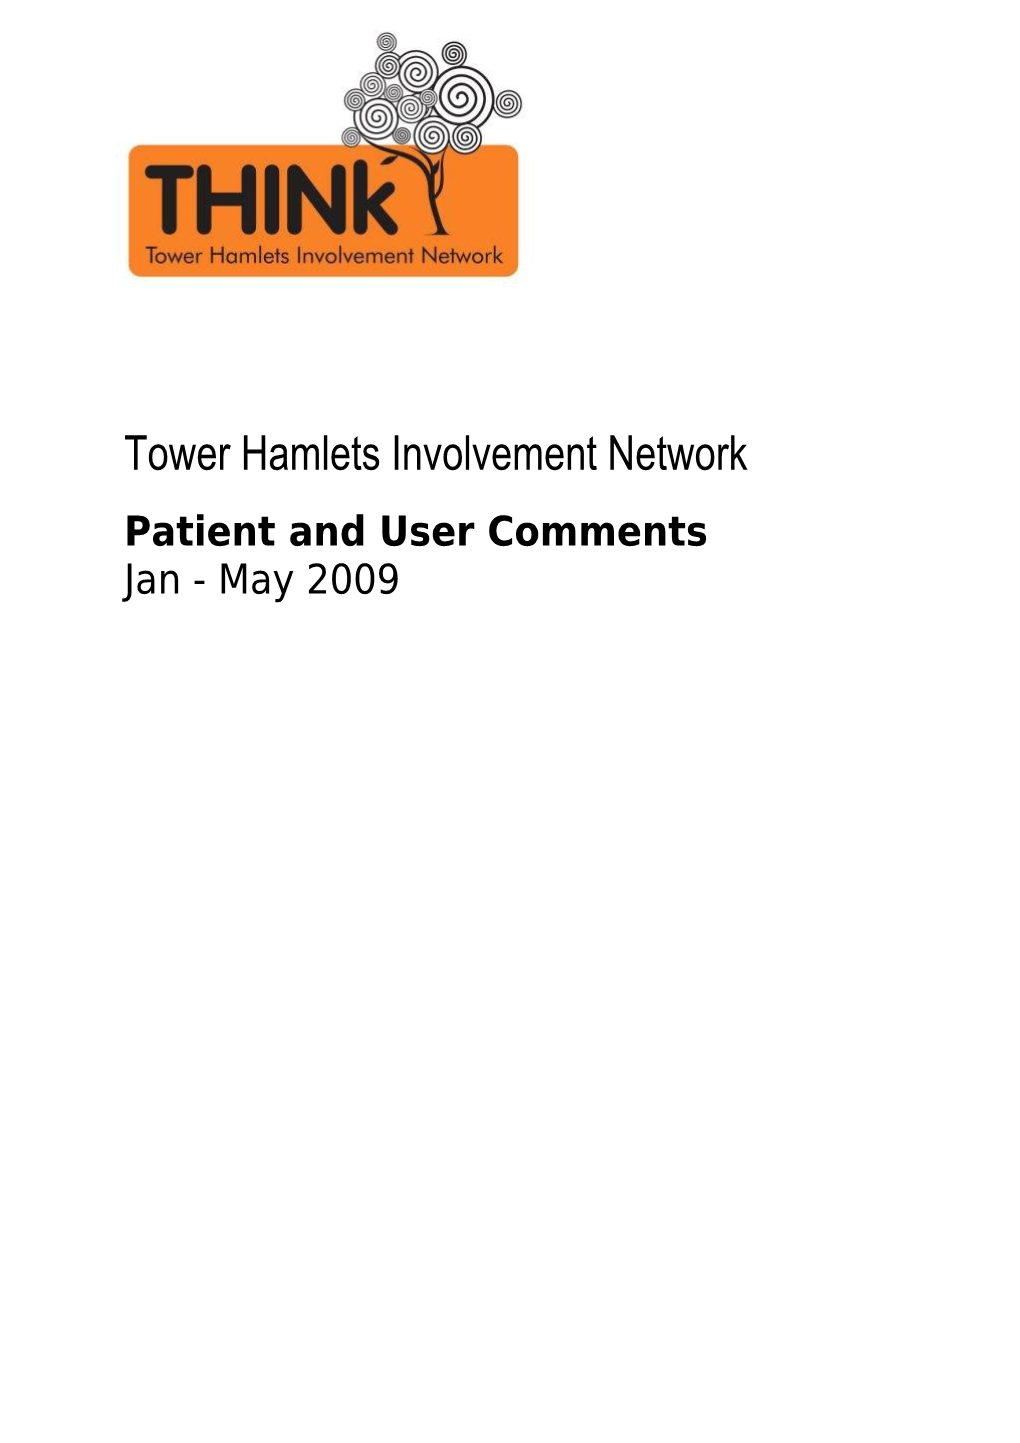 Patient and User Comments